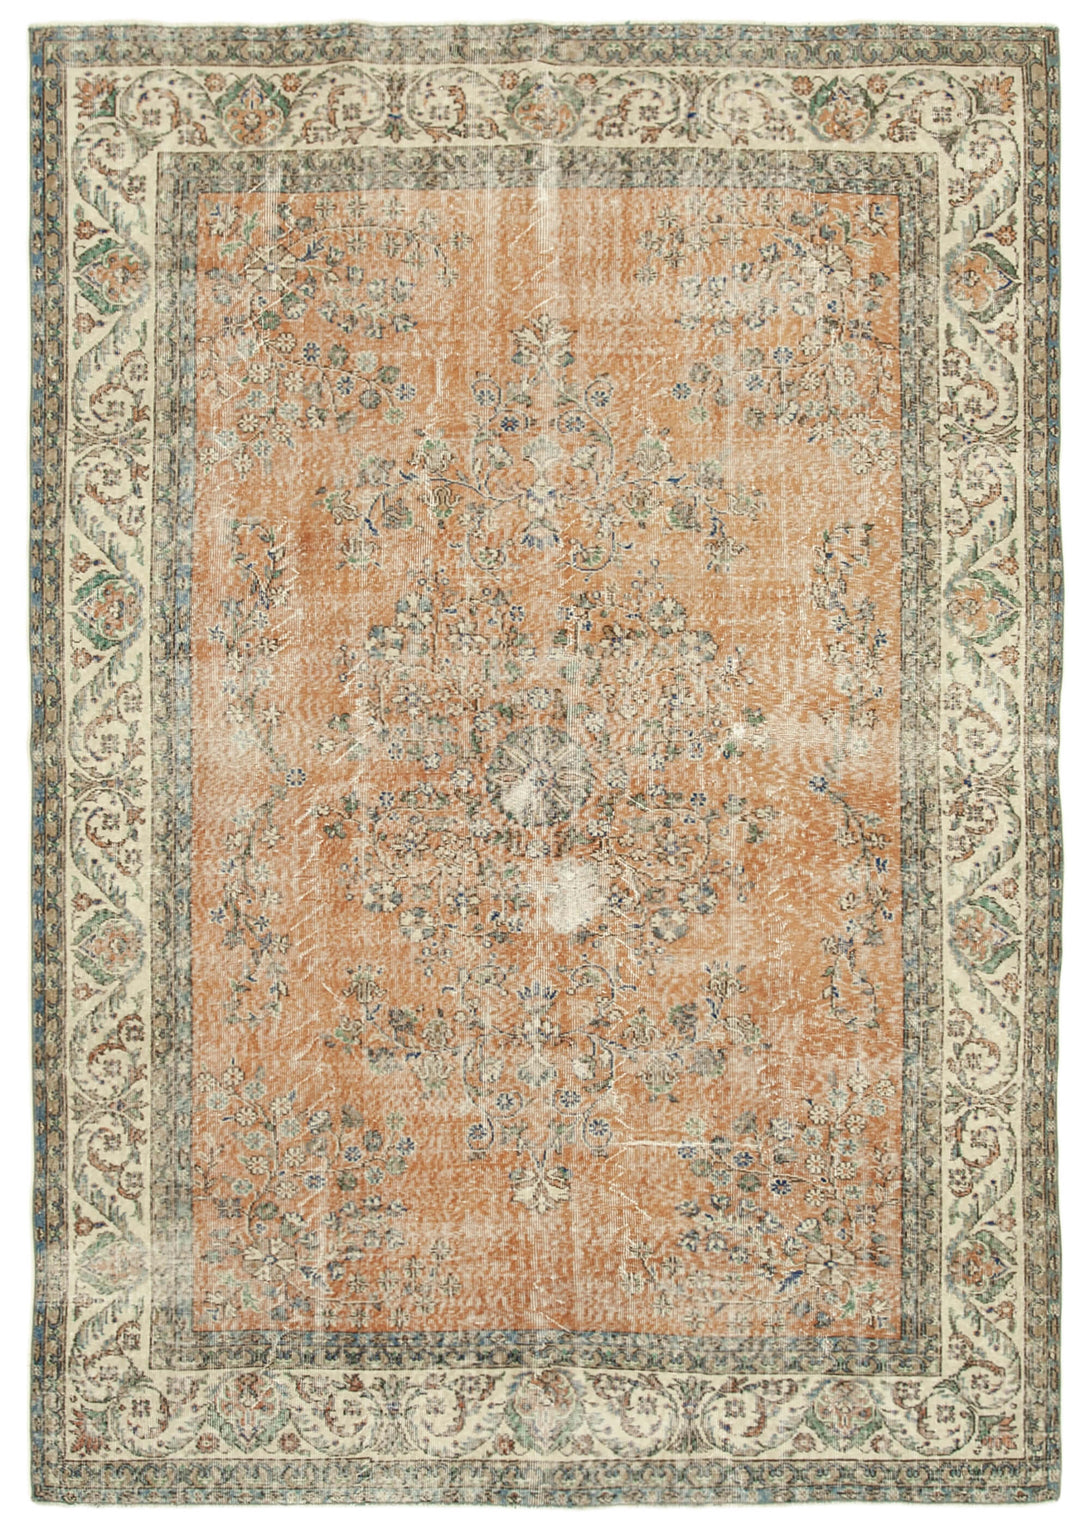 Handmade White Wash Area Rug > Design# OL-AC-38797 > Size: 7'-2" x 10'-2", Carpet Culture Rugs, Handmade Rugs, NYC Rugs, New Rugs, Shop Rugs, Rug Store, Outlet Rugs, SoHo Rugs, Rugs in USA